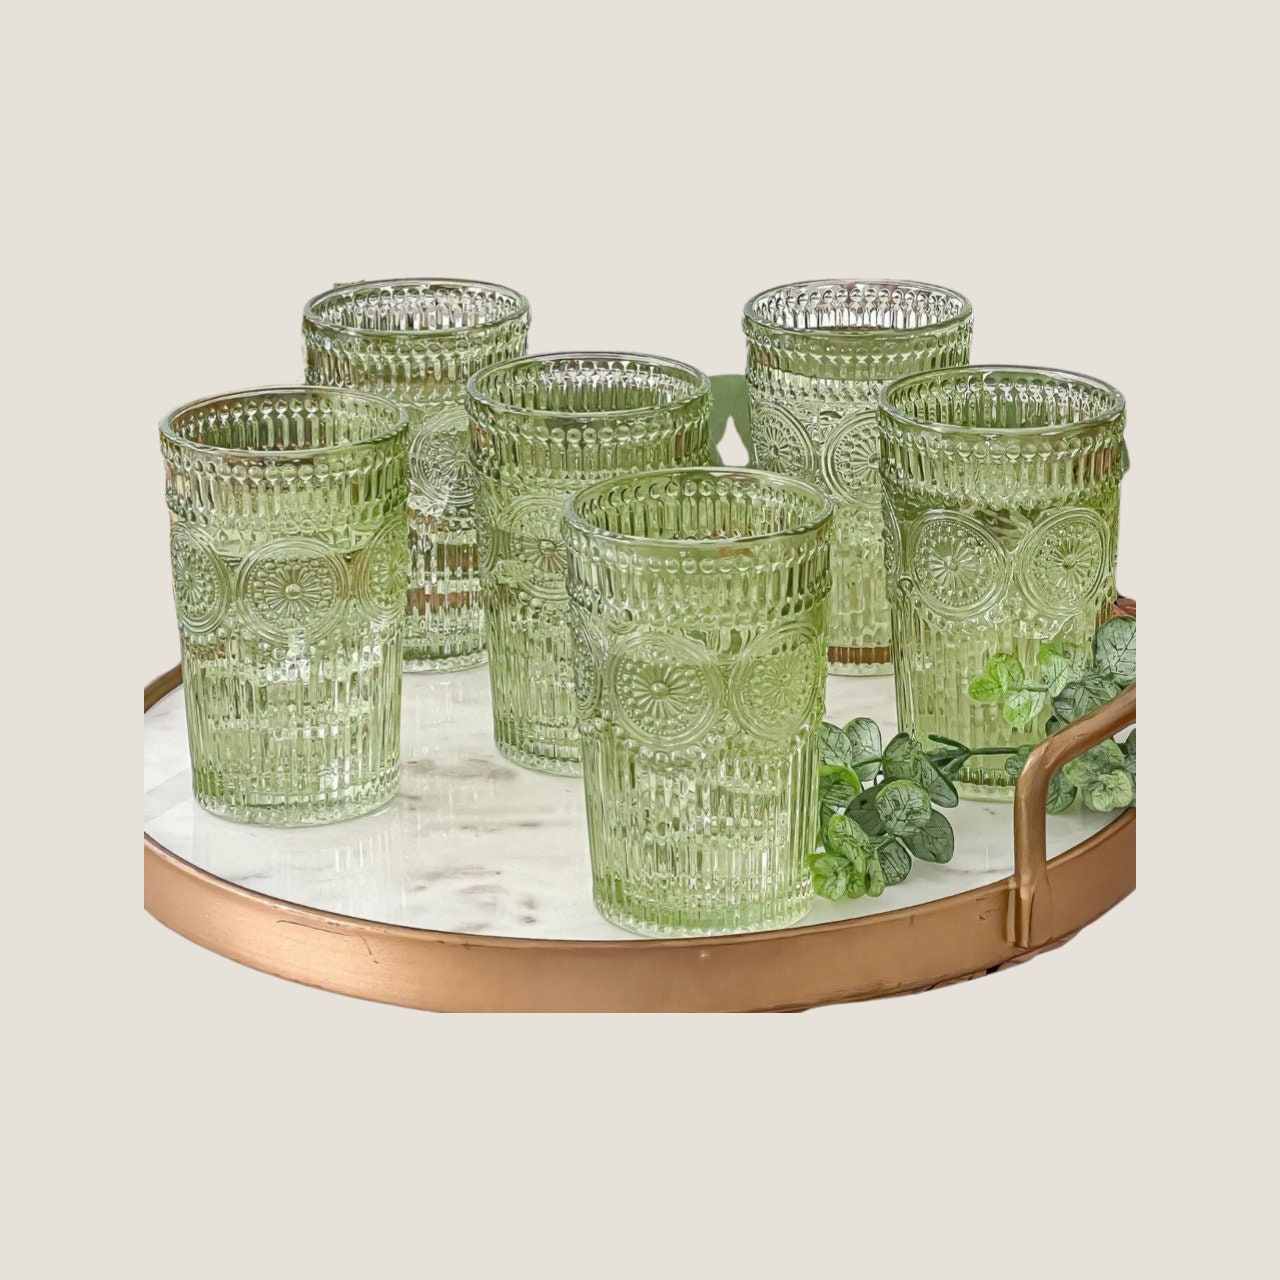 Khen Old-Fashioned Drinking Glasses | Set of 6 | 9.6 OZ Vintage Classic  Glassware For Drinks, Muted …See more Khen Old-Fashioned Drinking Glasses 